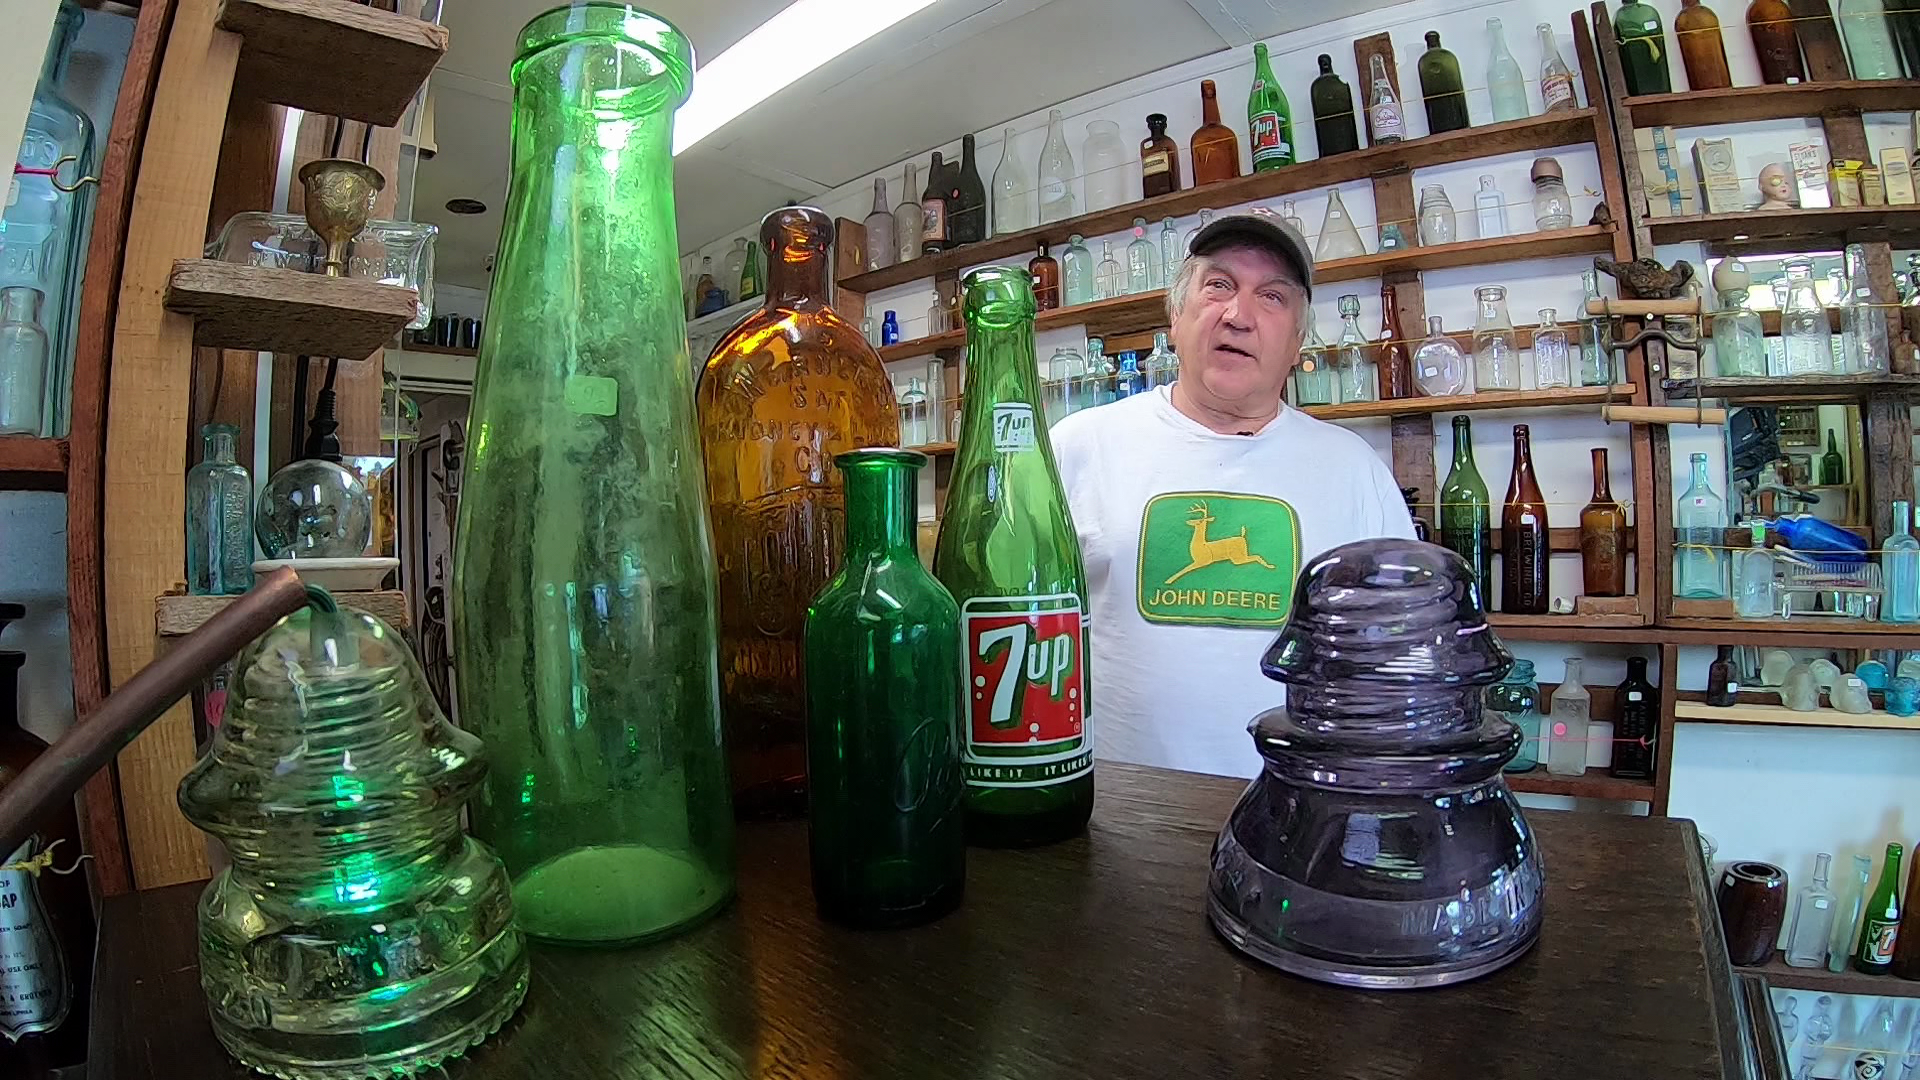 At Bottle Zone, owner Russ West displays thousands of bottles unearthed from all over the country. #k5evening